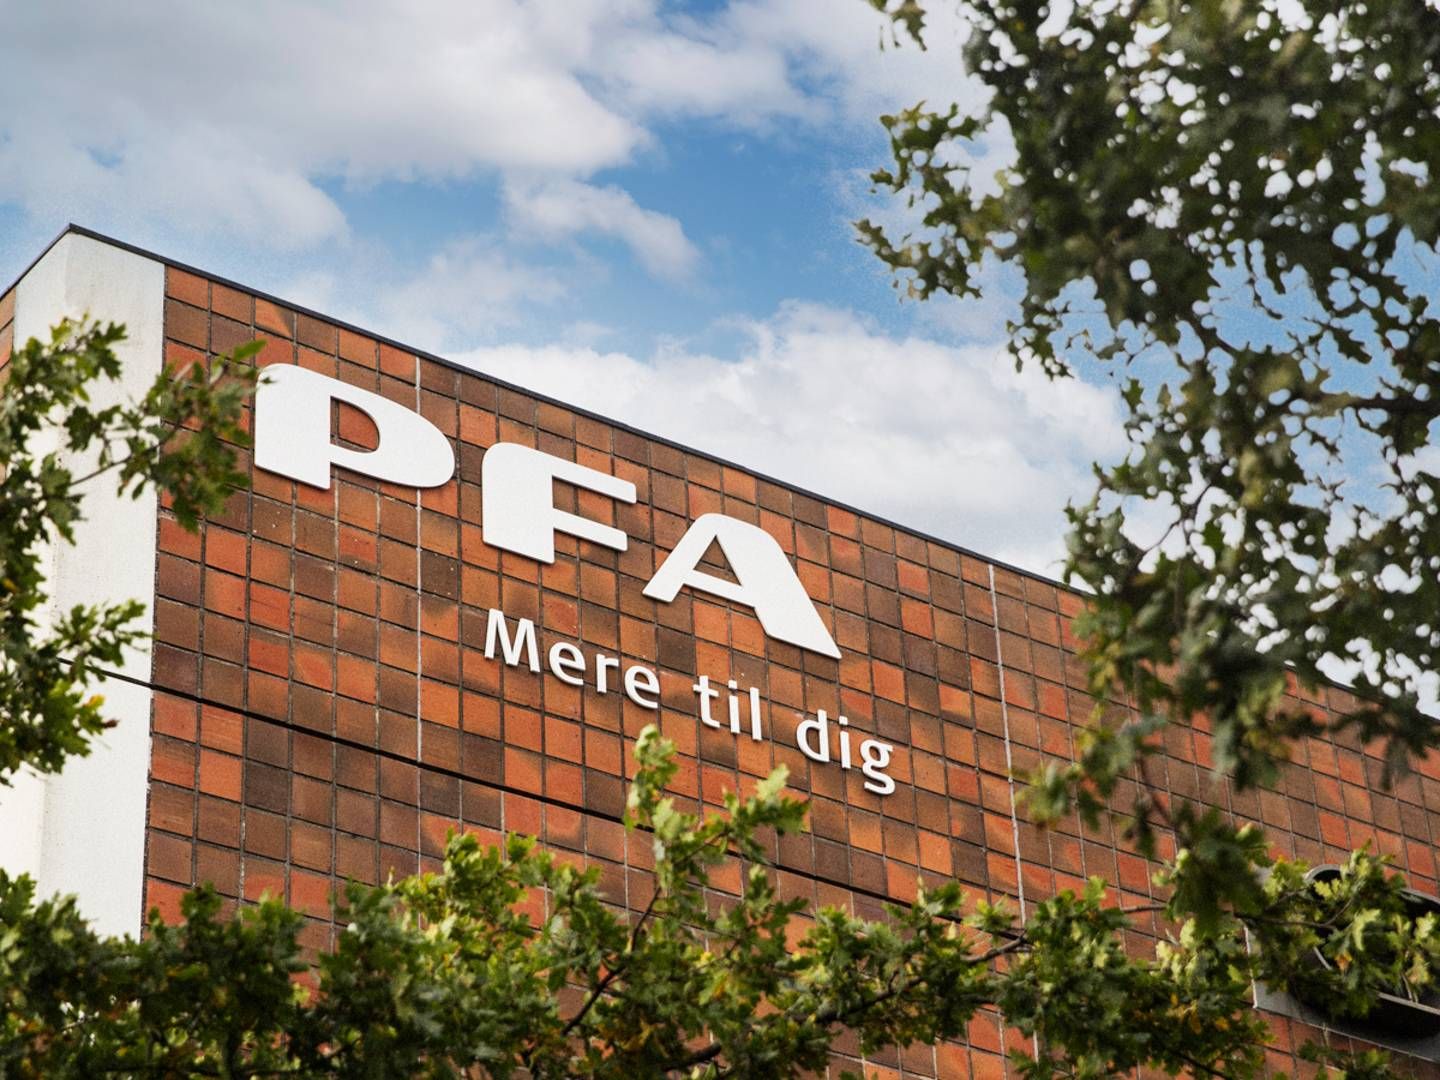 PFA is reconsidering its investment in sentenced mining company. | Photo: PR / PFA